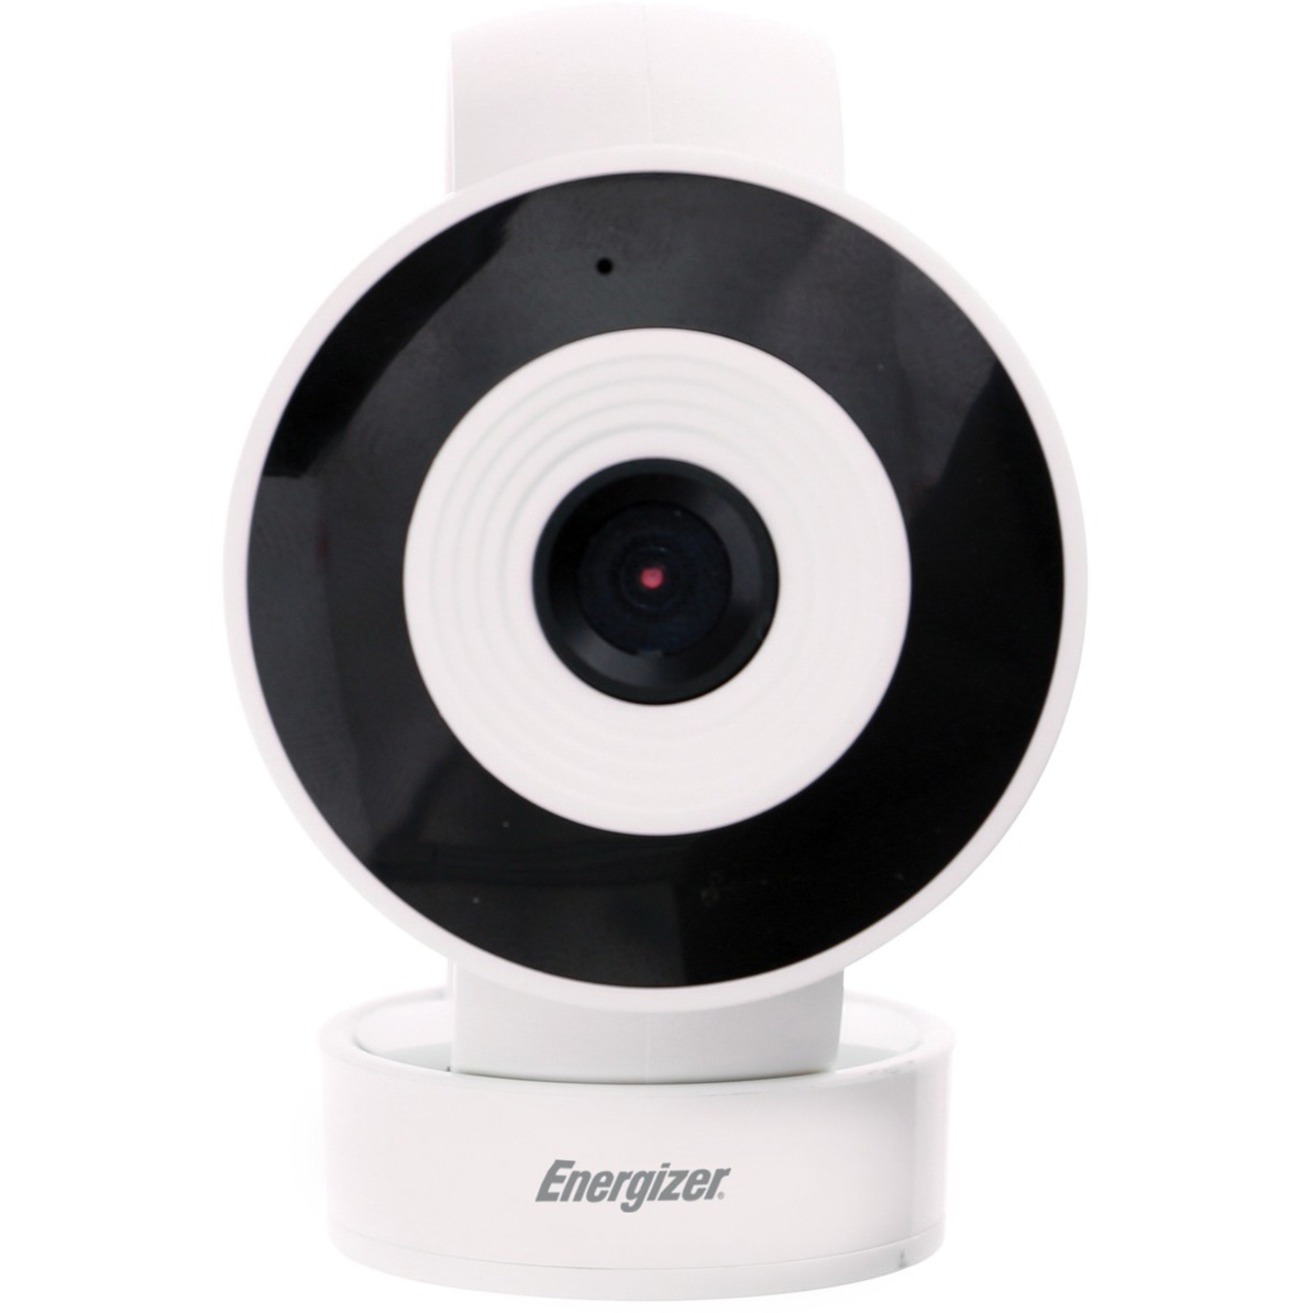 Energizer Smart Wi-Fi 720p Indoor Camera, White, Two Way Audio, Night Vision, Remote Access - image 3 of 10